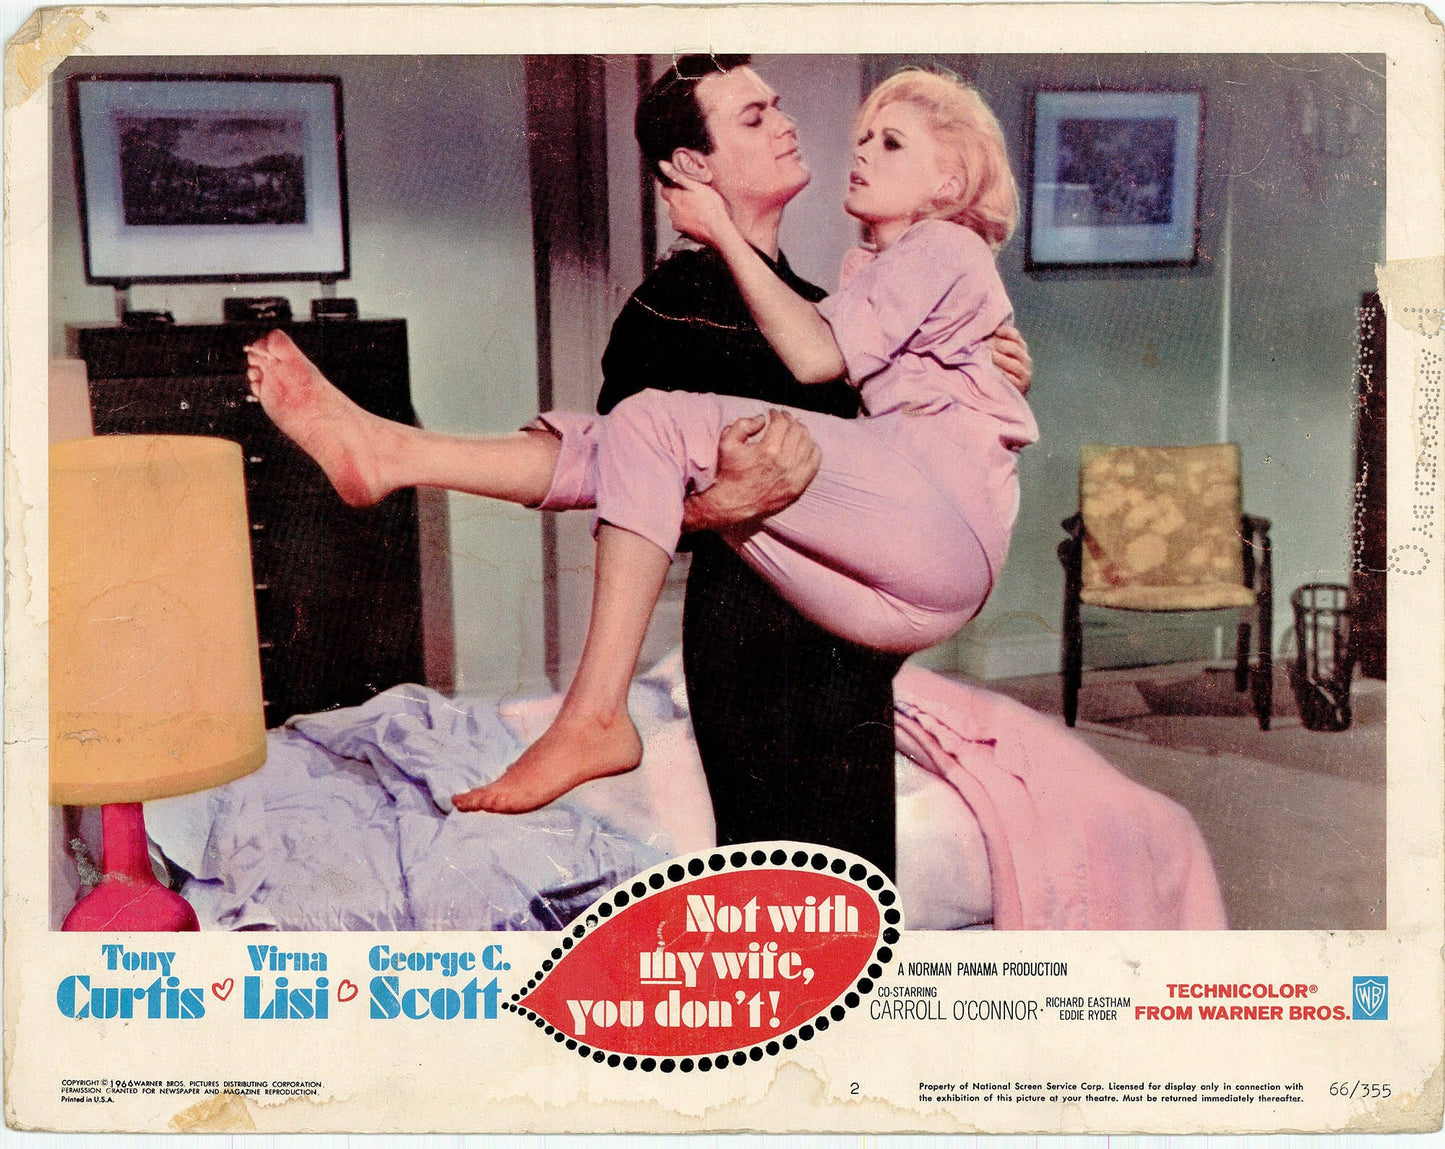 Not With My Wife, You Don't Movie Lobby Card